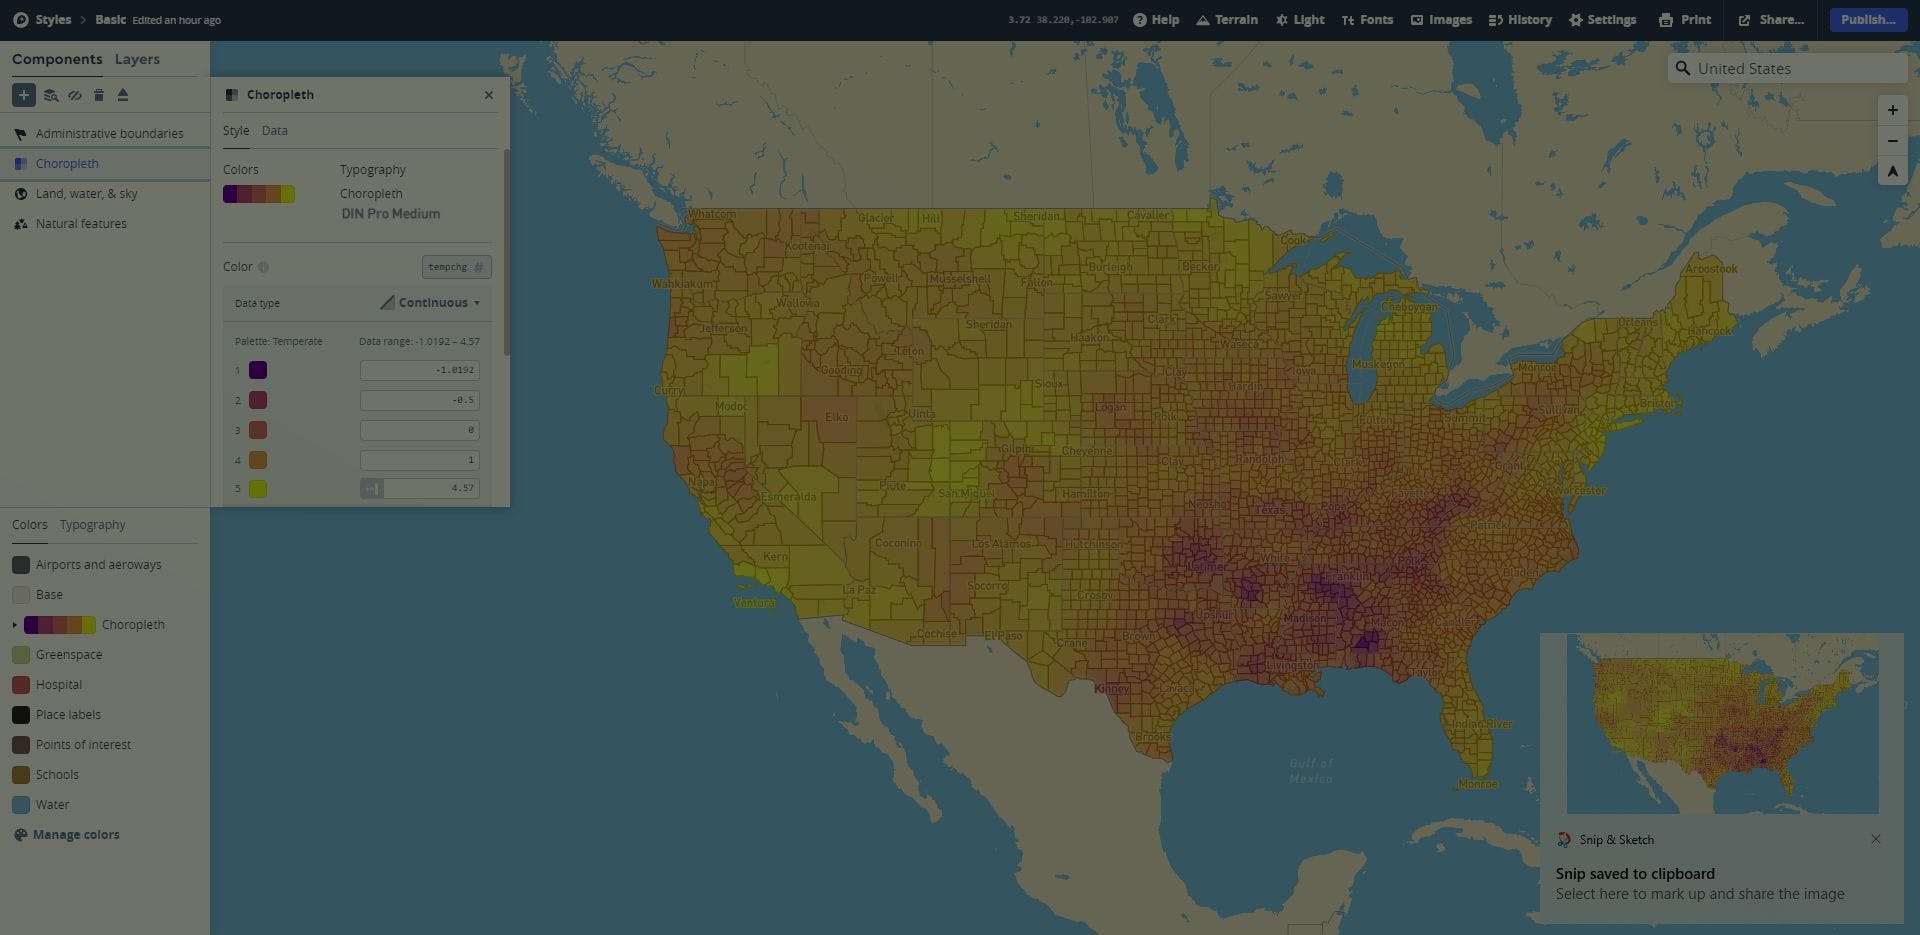 /create-a-data-visualization-map-using-mapbox-without-no-coding-xr40337m feature image